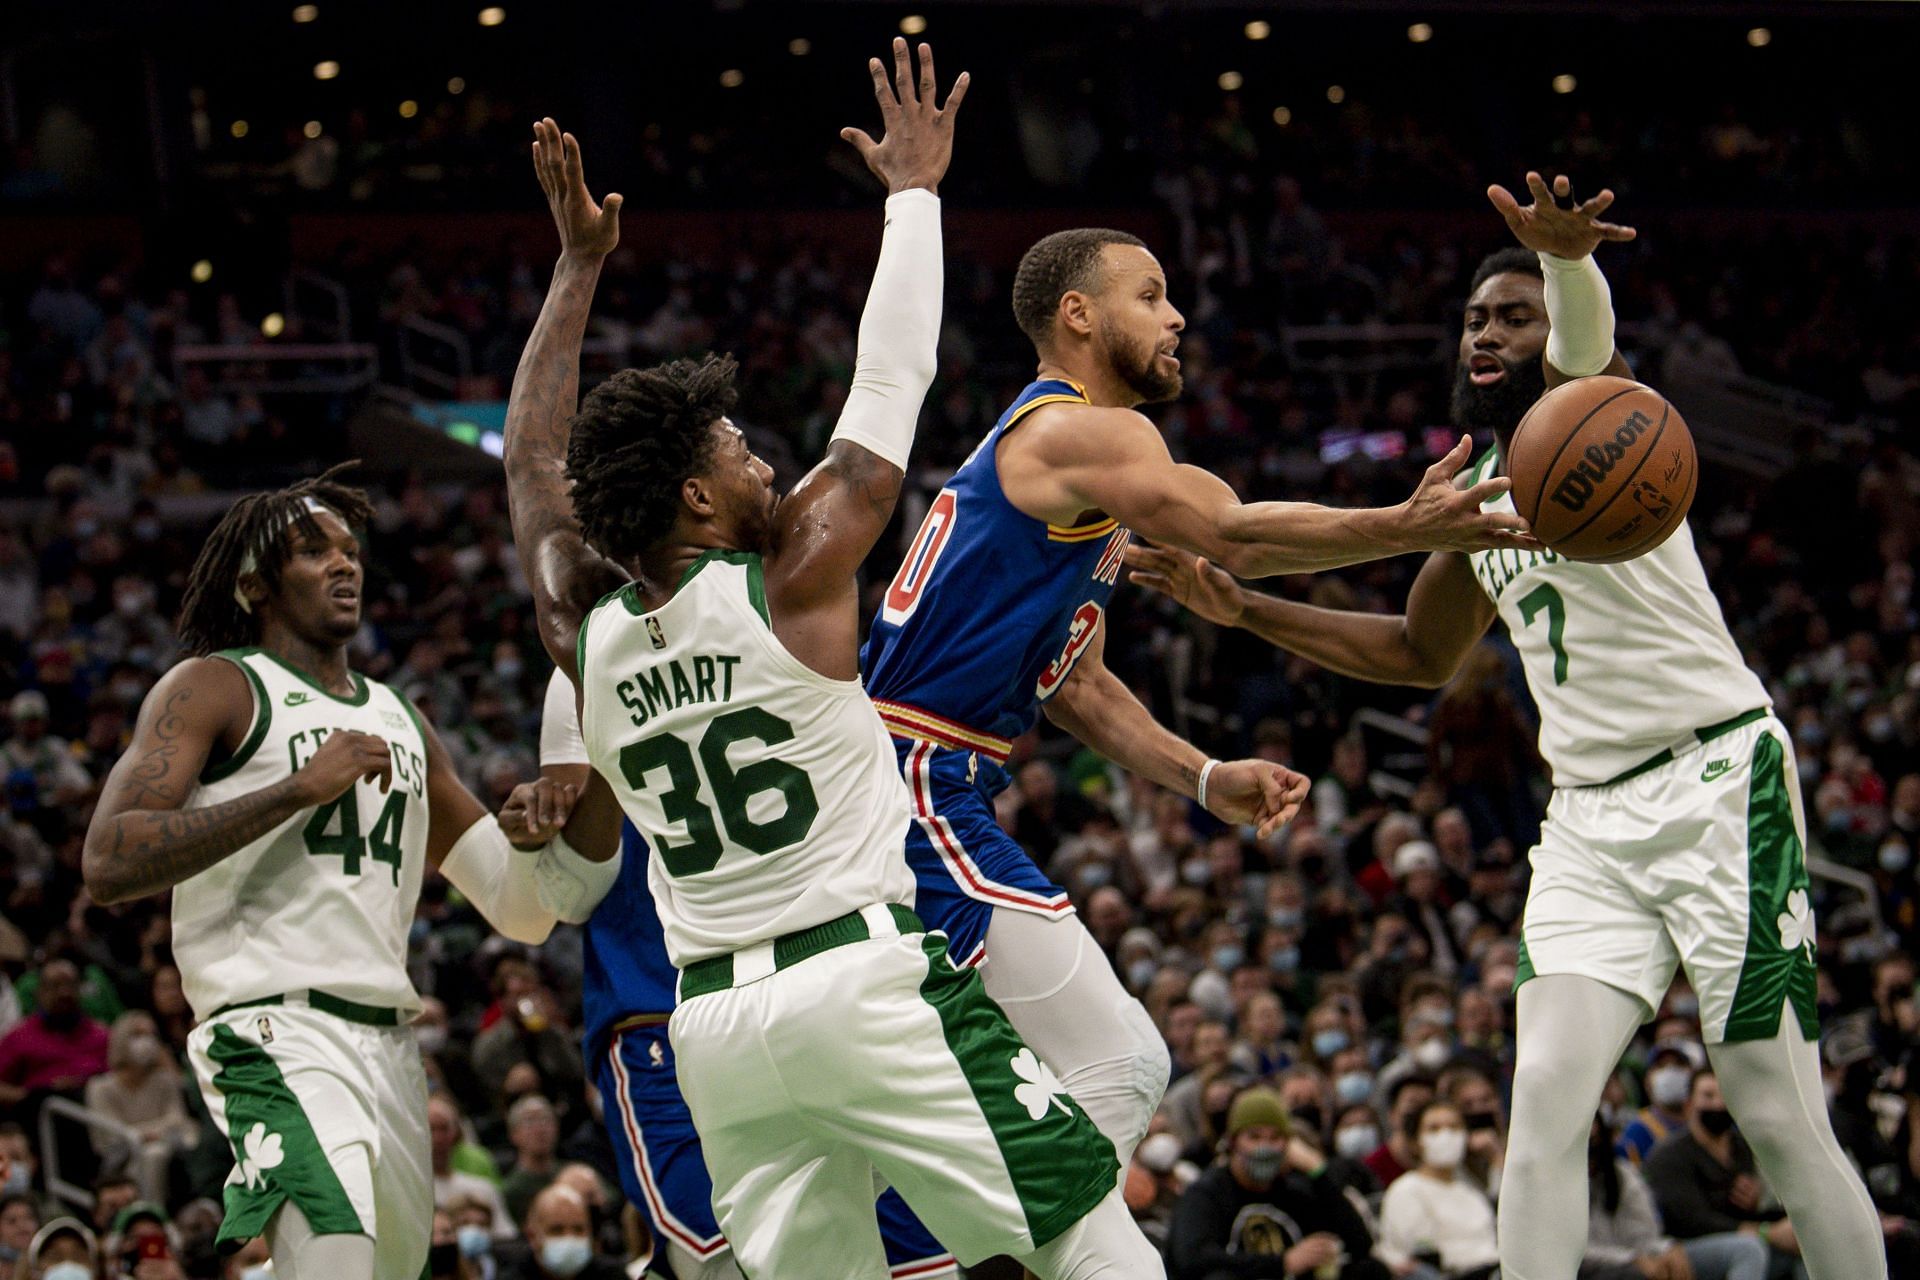 The way the Boston Celtics have been playing this series, many believe that the 2022 finals will see Golden State Warriors go up against the Boston Celtics.